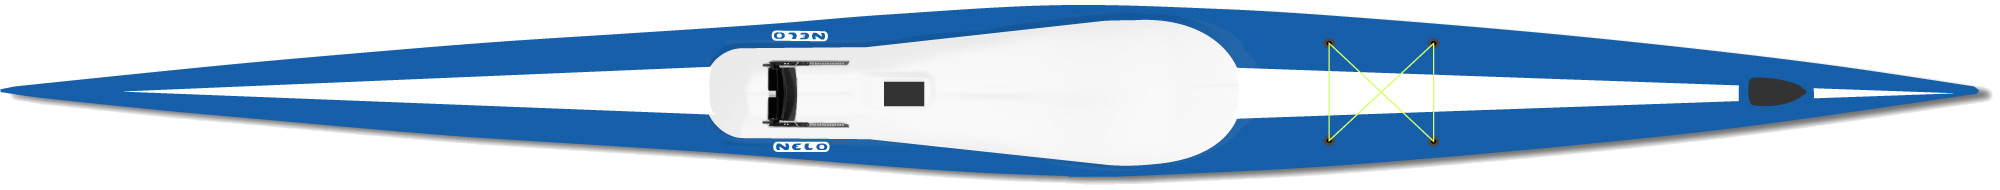 Nelo Surfskis Info and Price